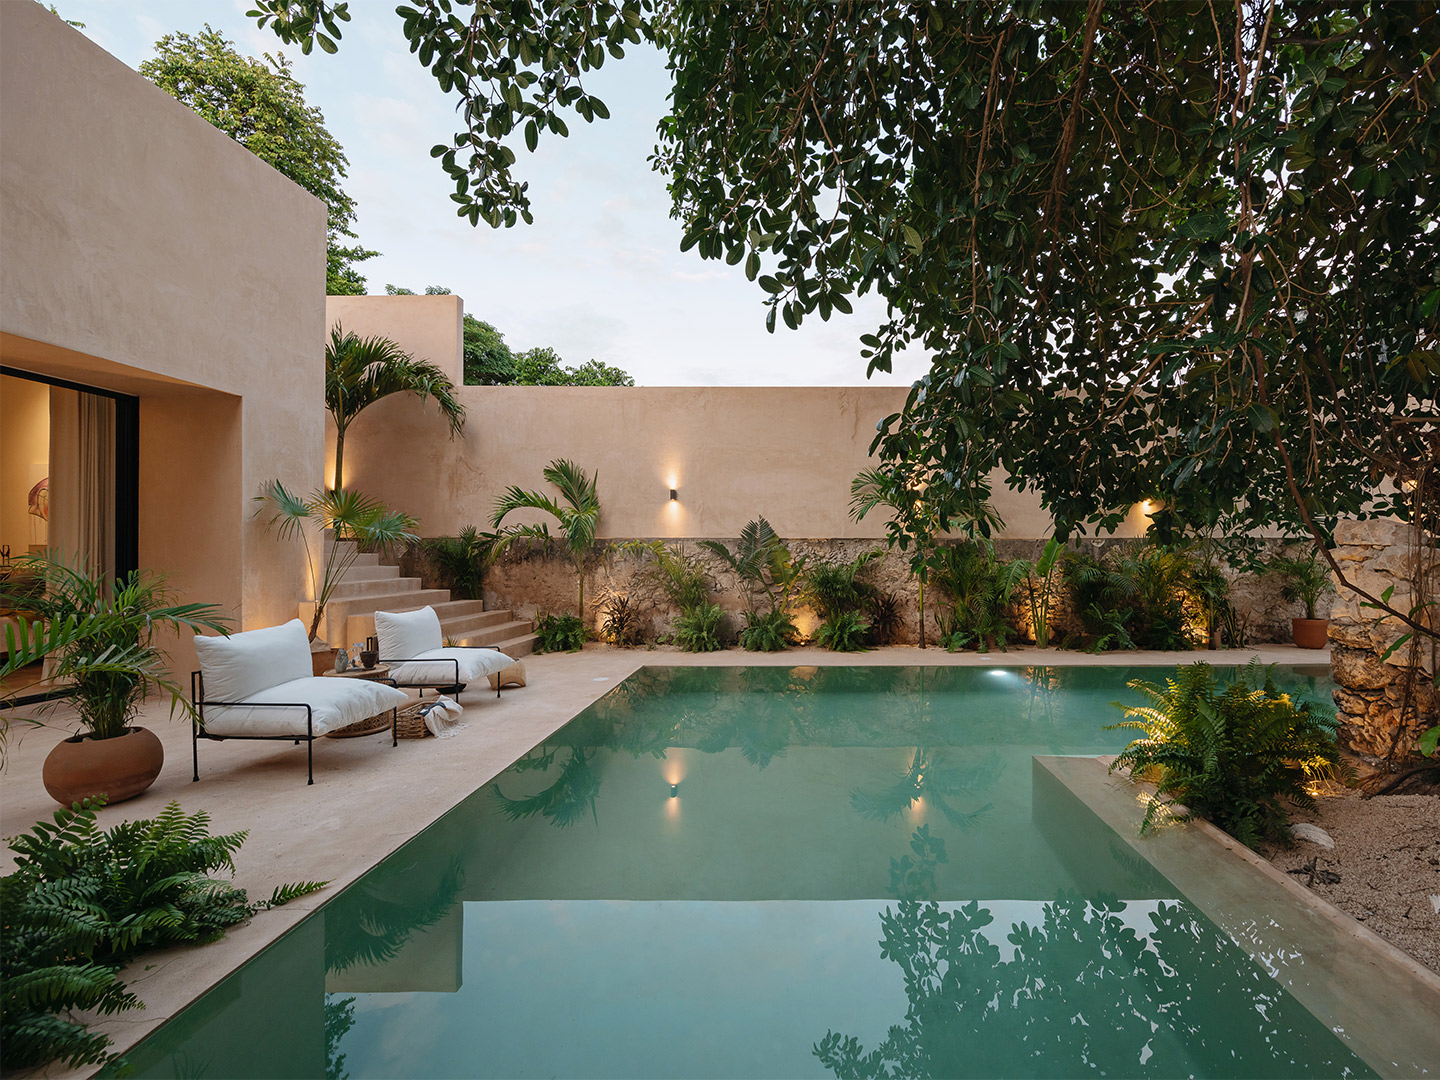 Home tour: A lush oasis rests at the heart of Casa Huolpoch in Mexico